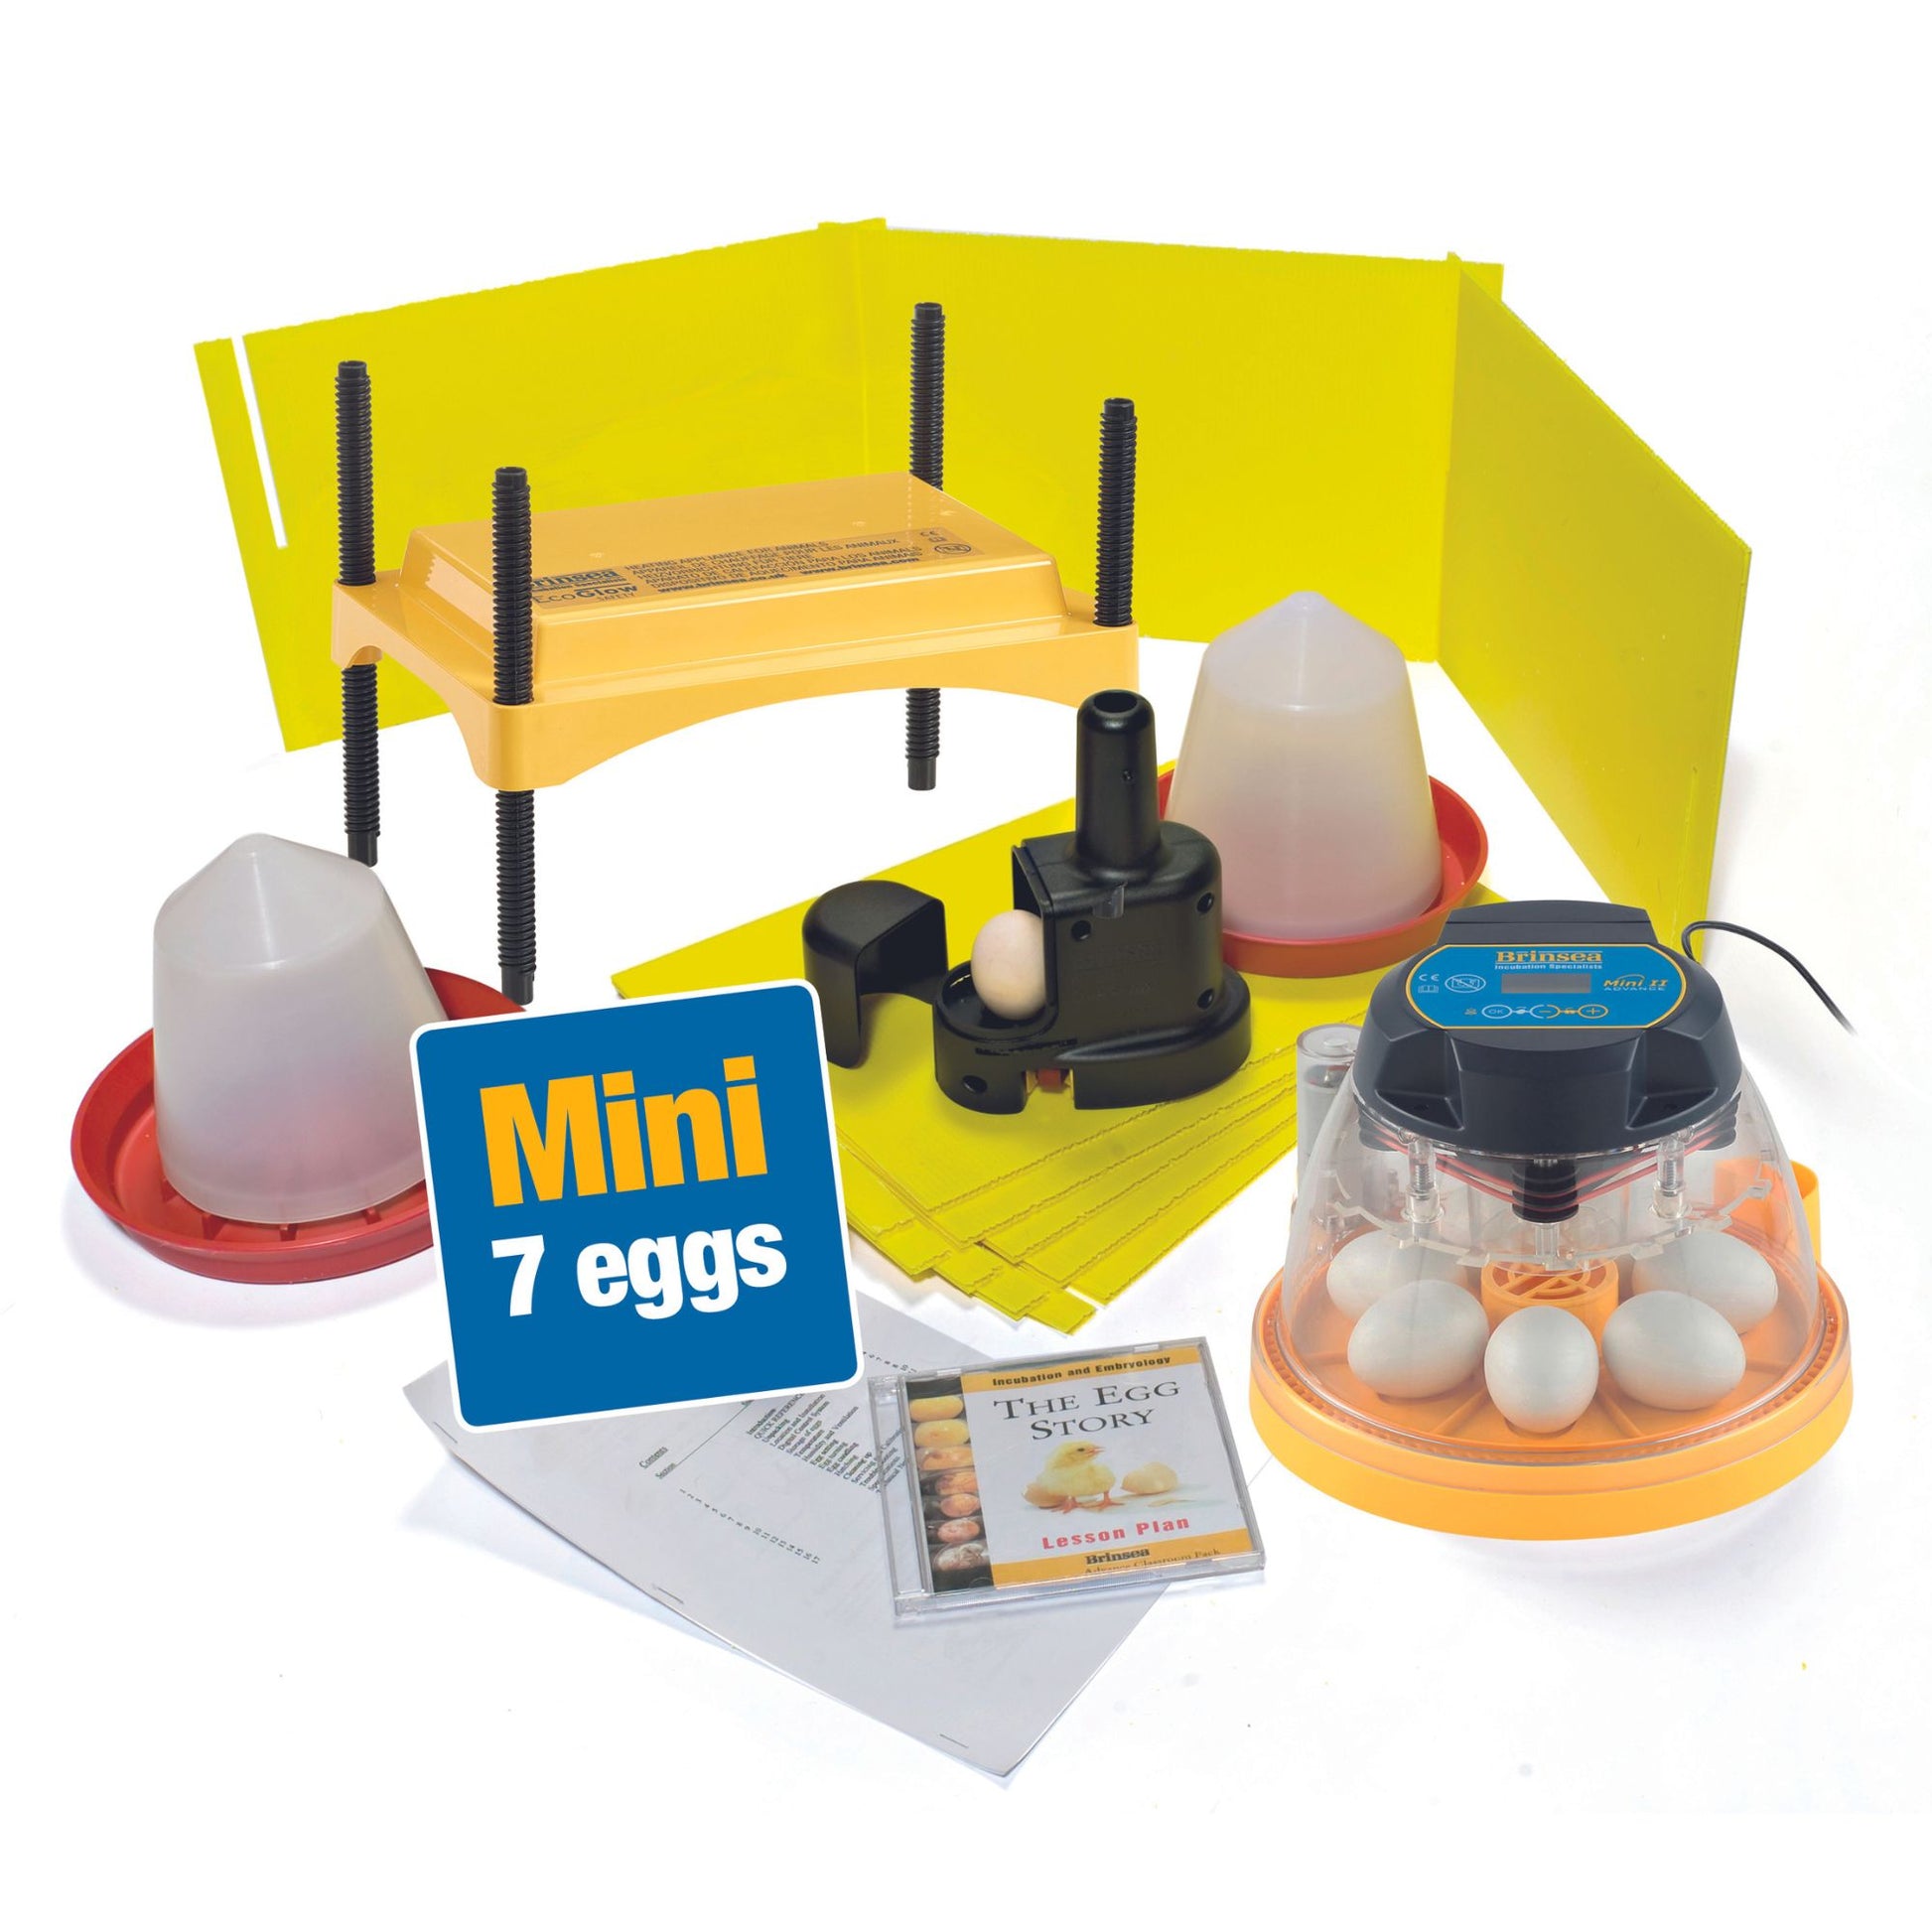 The Brinsea Mini II Advance Classroom Incubator and Brooder Pack is perfect for a school or home hatching project. 